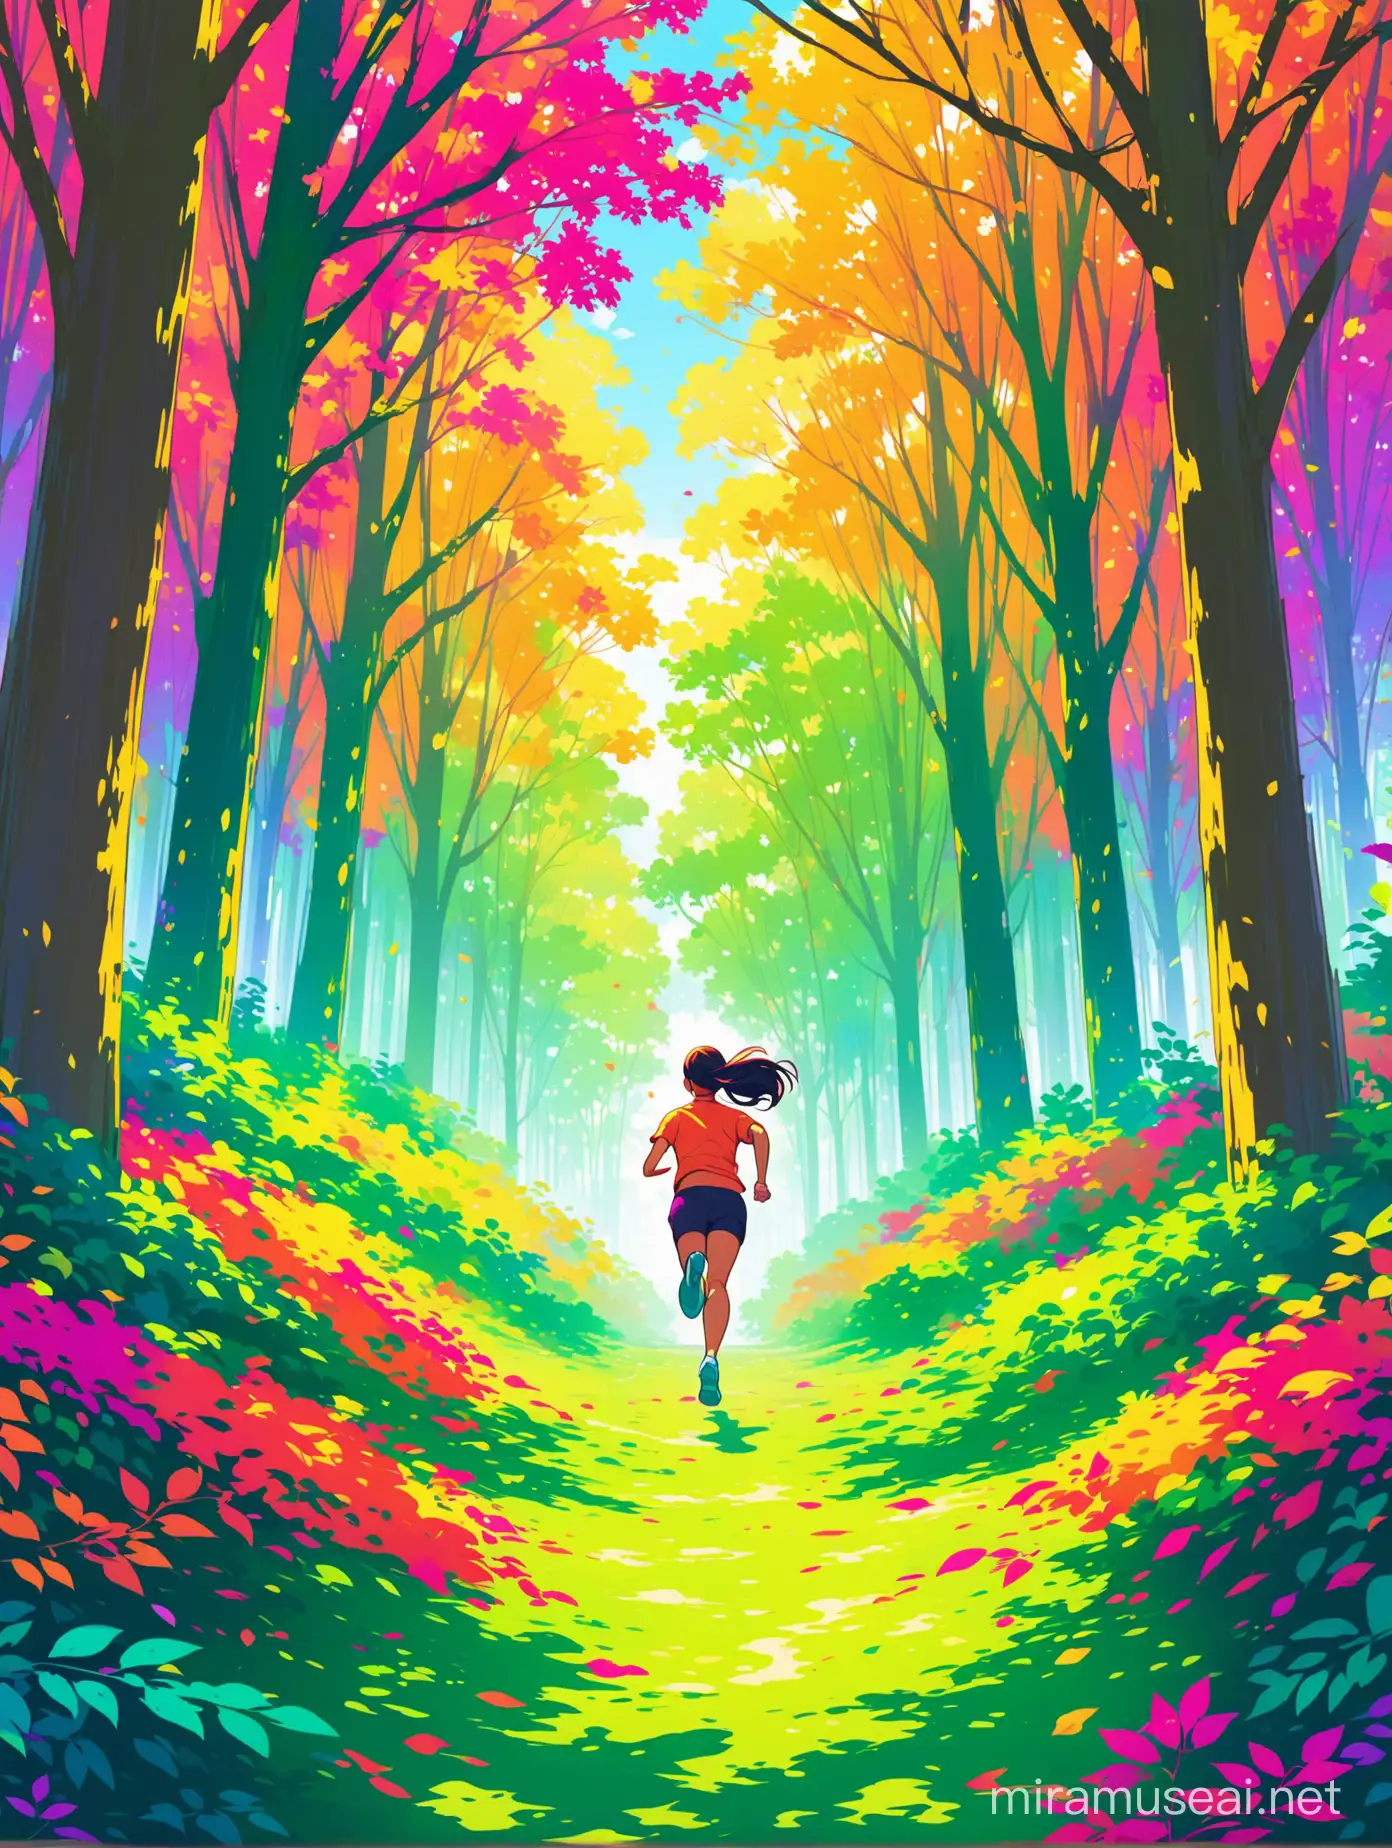 a person running through a vibrant forest, surrounded by lush greenery and colorful foliage.